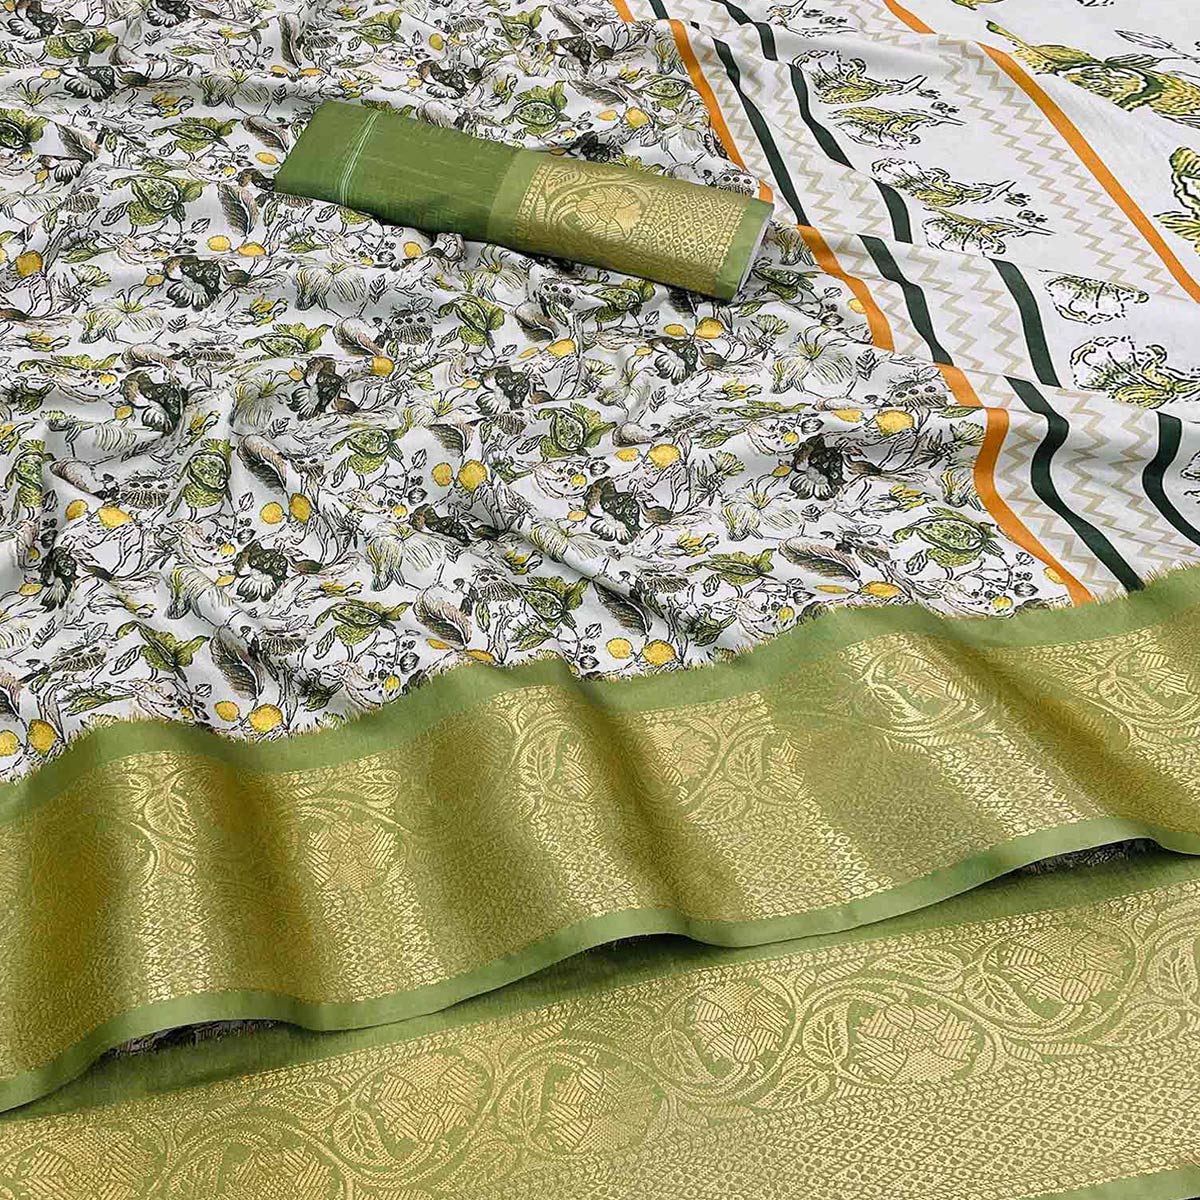 Off White & Green Floral Digital Printed With Woven Border Dola Silk Saree